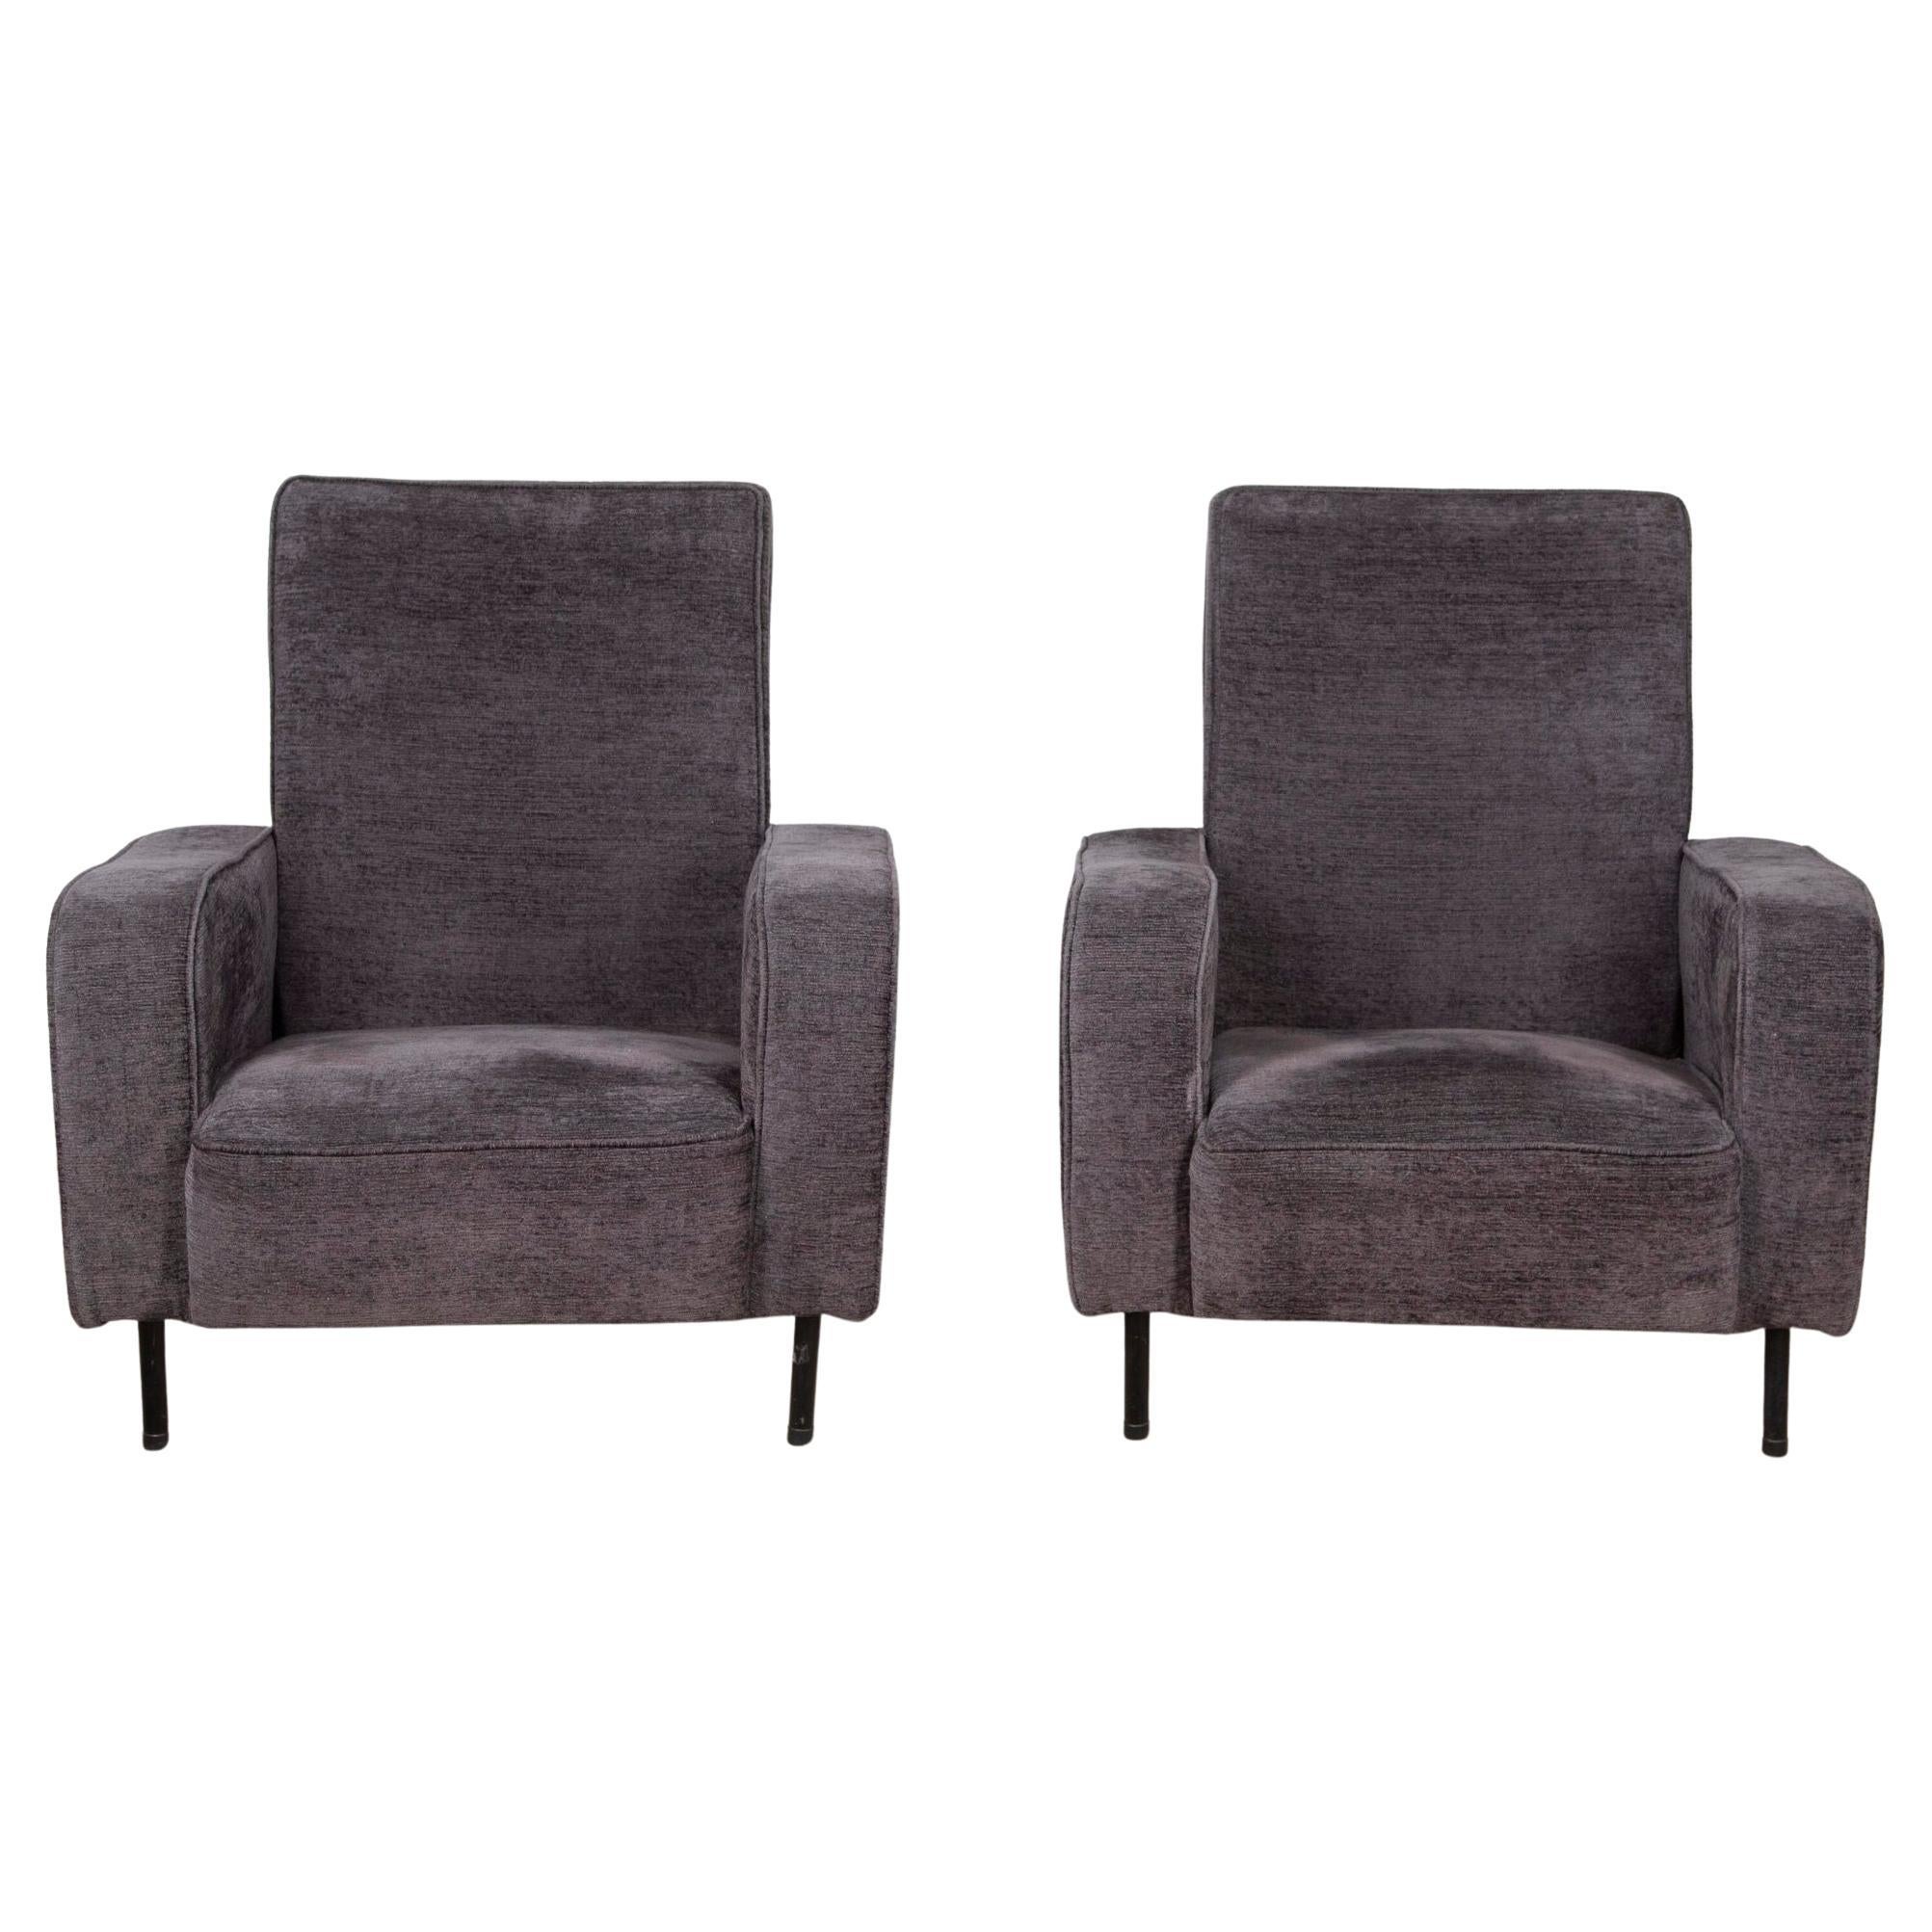 Pair of Airborne Armchairs Attributed to Pierre Guariche